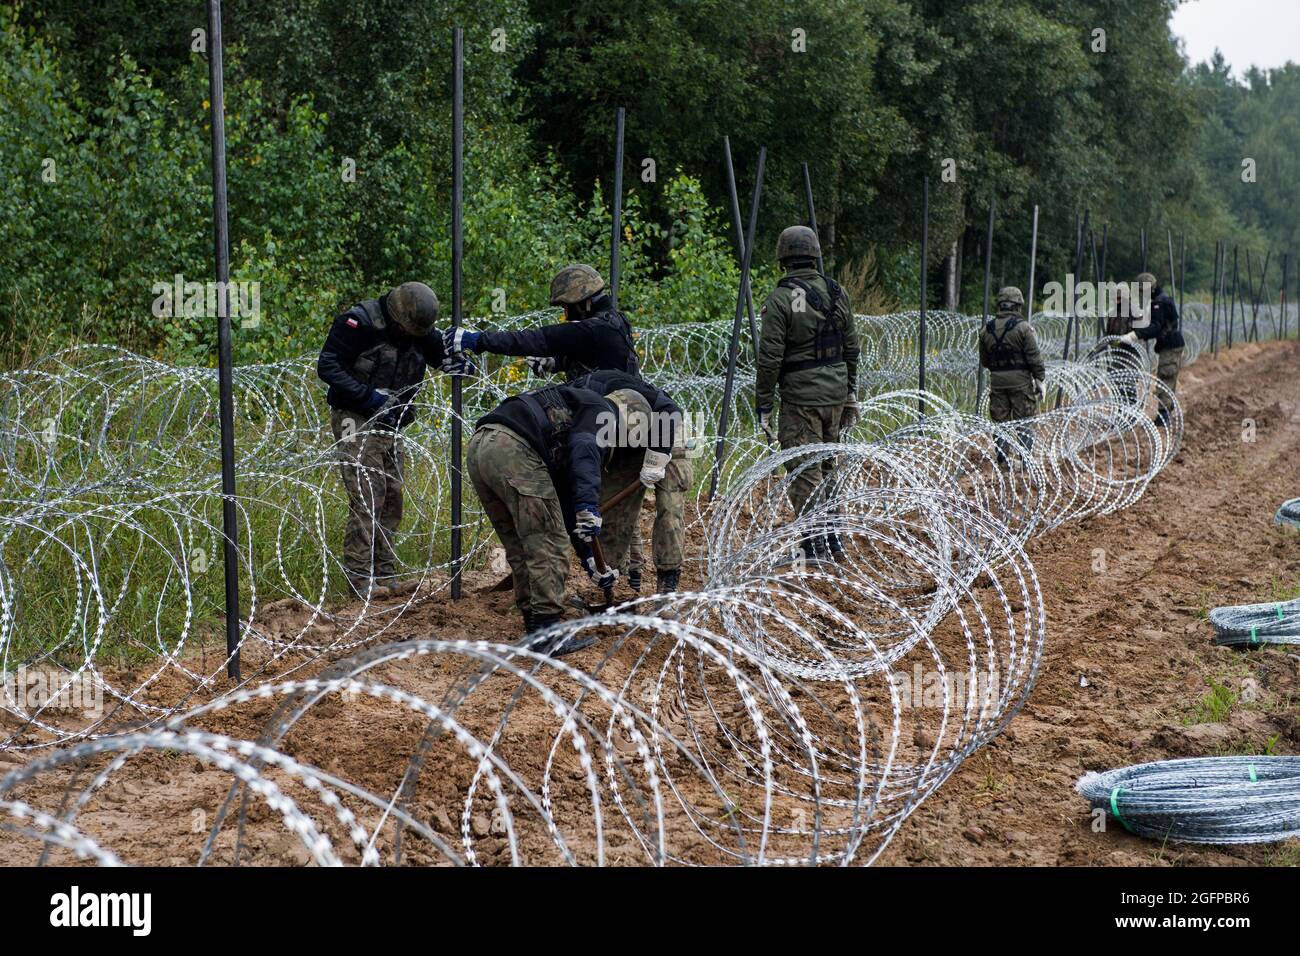 Zubrzyca Wielka, Poland. 26th Aug, 2021. Polish soldiers are seen building a fence along the border with Belarus.Polish army is building a 2.5 meters high barbed wire fence along its border and EU border at the same time with Belarus to stop the recent surge in illegal crossings, mainly by people from Iraq and Afghanistan. Warsaw and Brussels have accused Minsk of deliberately facilitating the passage of migrants into the European Union. (Photo by Attila Husejnow/SOPA Images/Sipa USA) Credit: Sipa USA/Alamy Live News Stock Photo